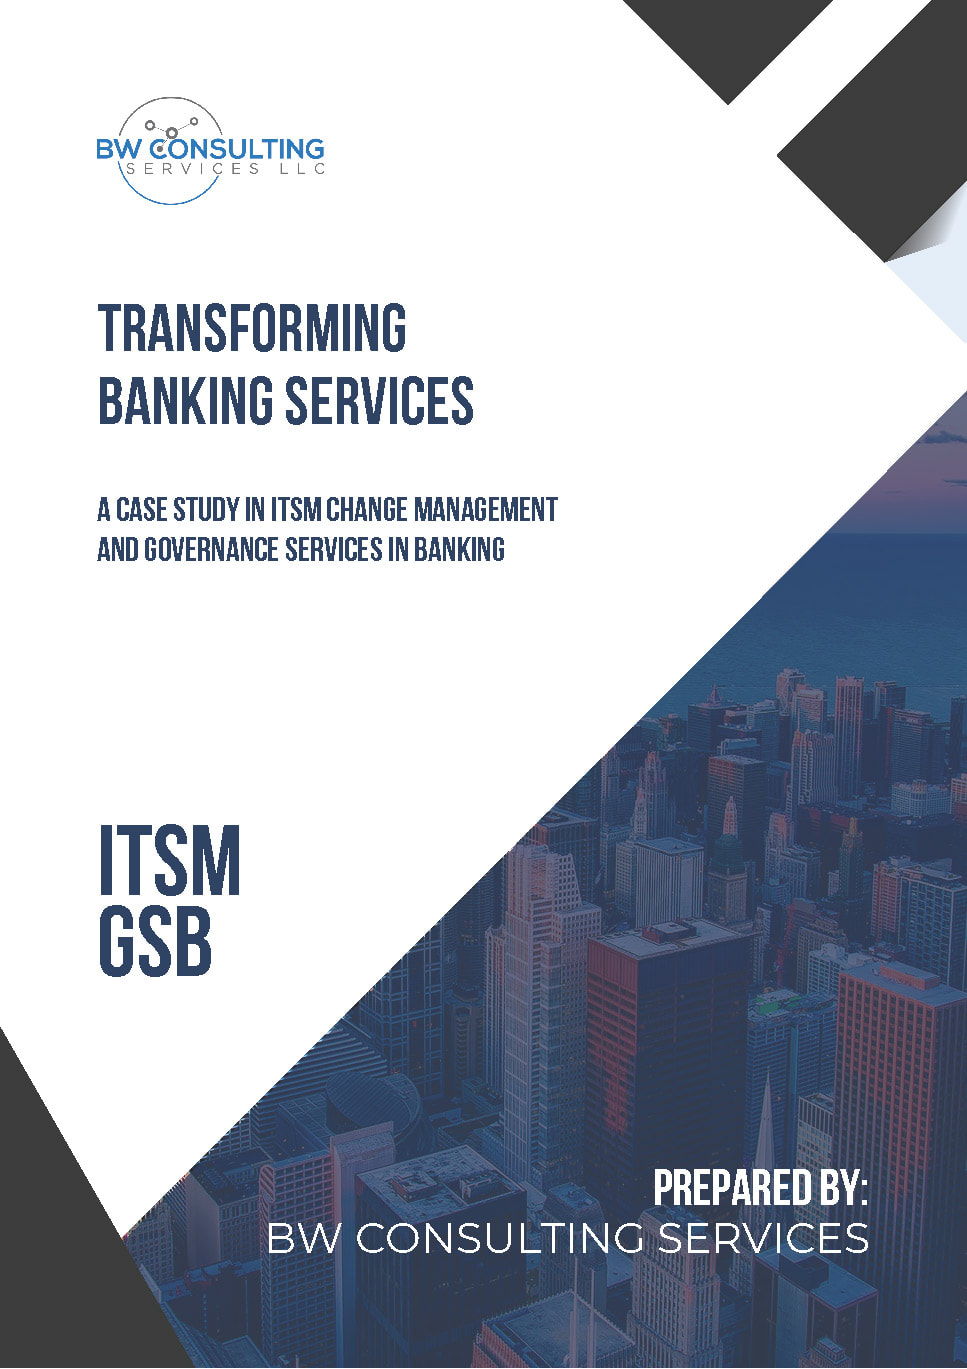 Information Technology Service Management (ITSM) is pivotal in maintaining operational excellence, compliance, and customer satisfaction in the highly regulated and dynamic banking world. This case study examines how a leading bank successfully overhauled its ITSM Change Management and Governance Services to meet the evolving demands of the financial industry.